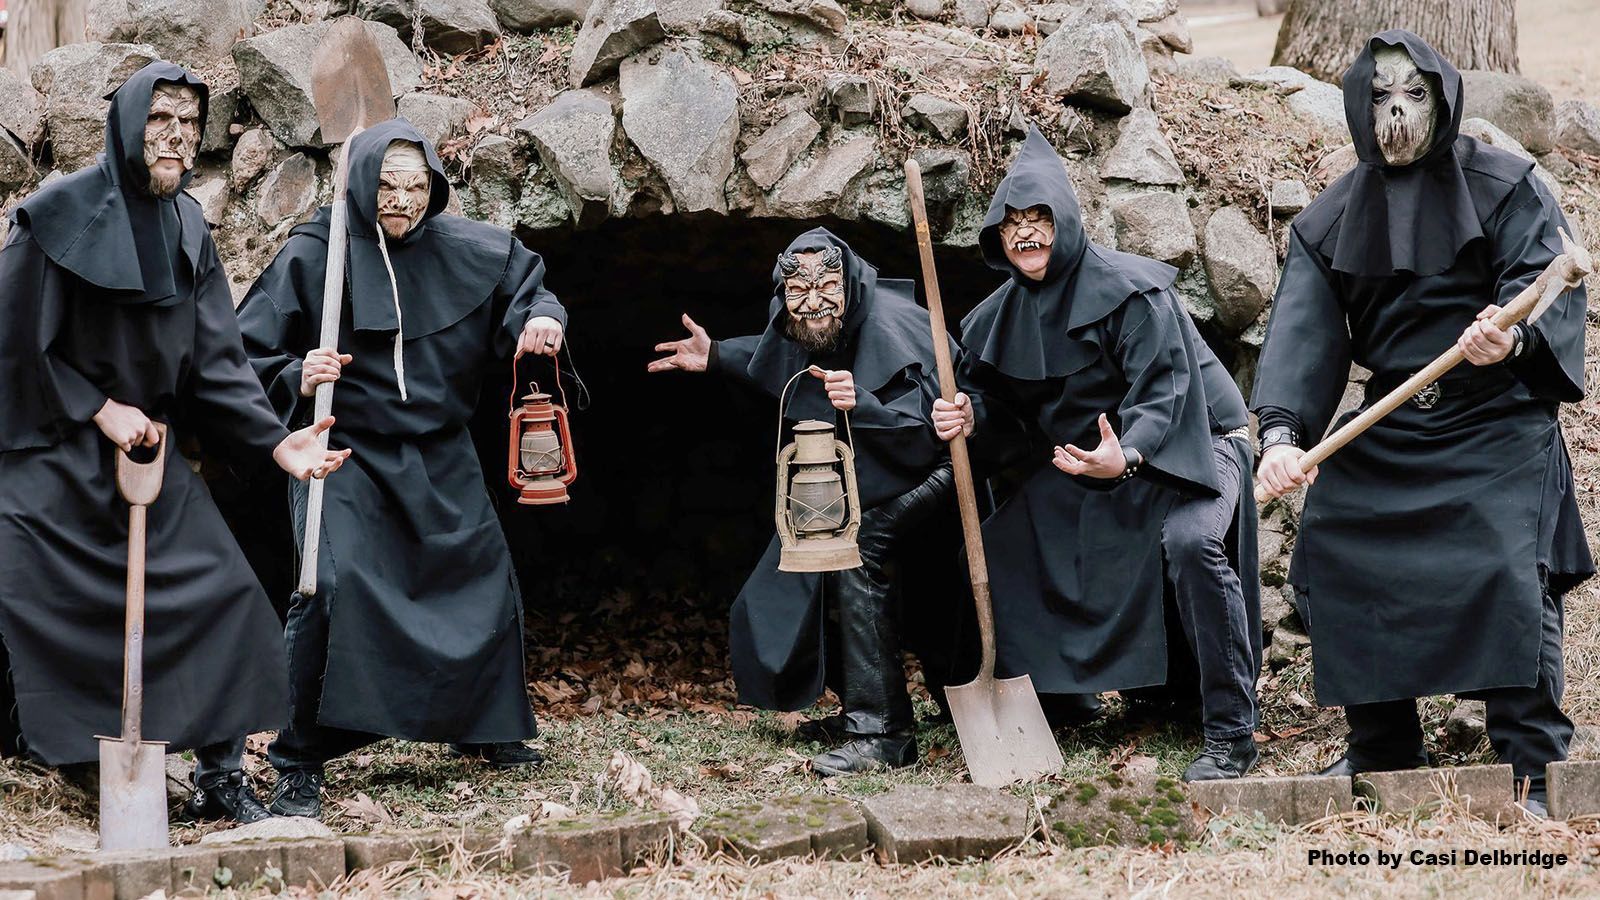 Local horror punk band The Lurking Corpses recently announced they will release a new album this year, Lurking After Midnight. It will be their first LP since 2014’s Workin’ for the Devil.